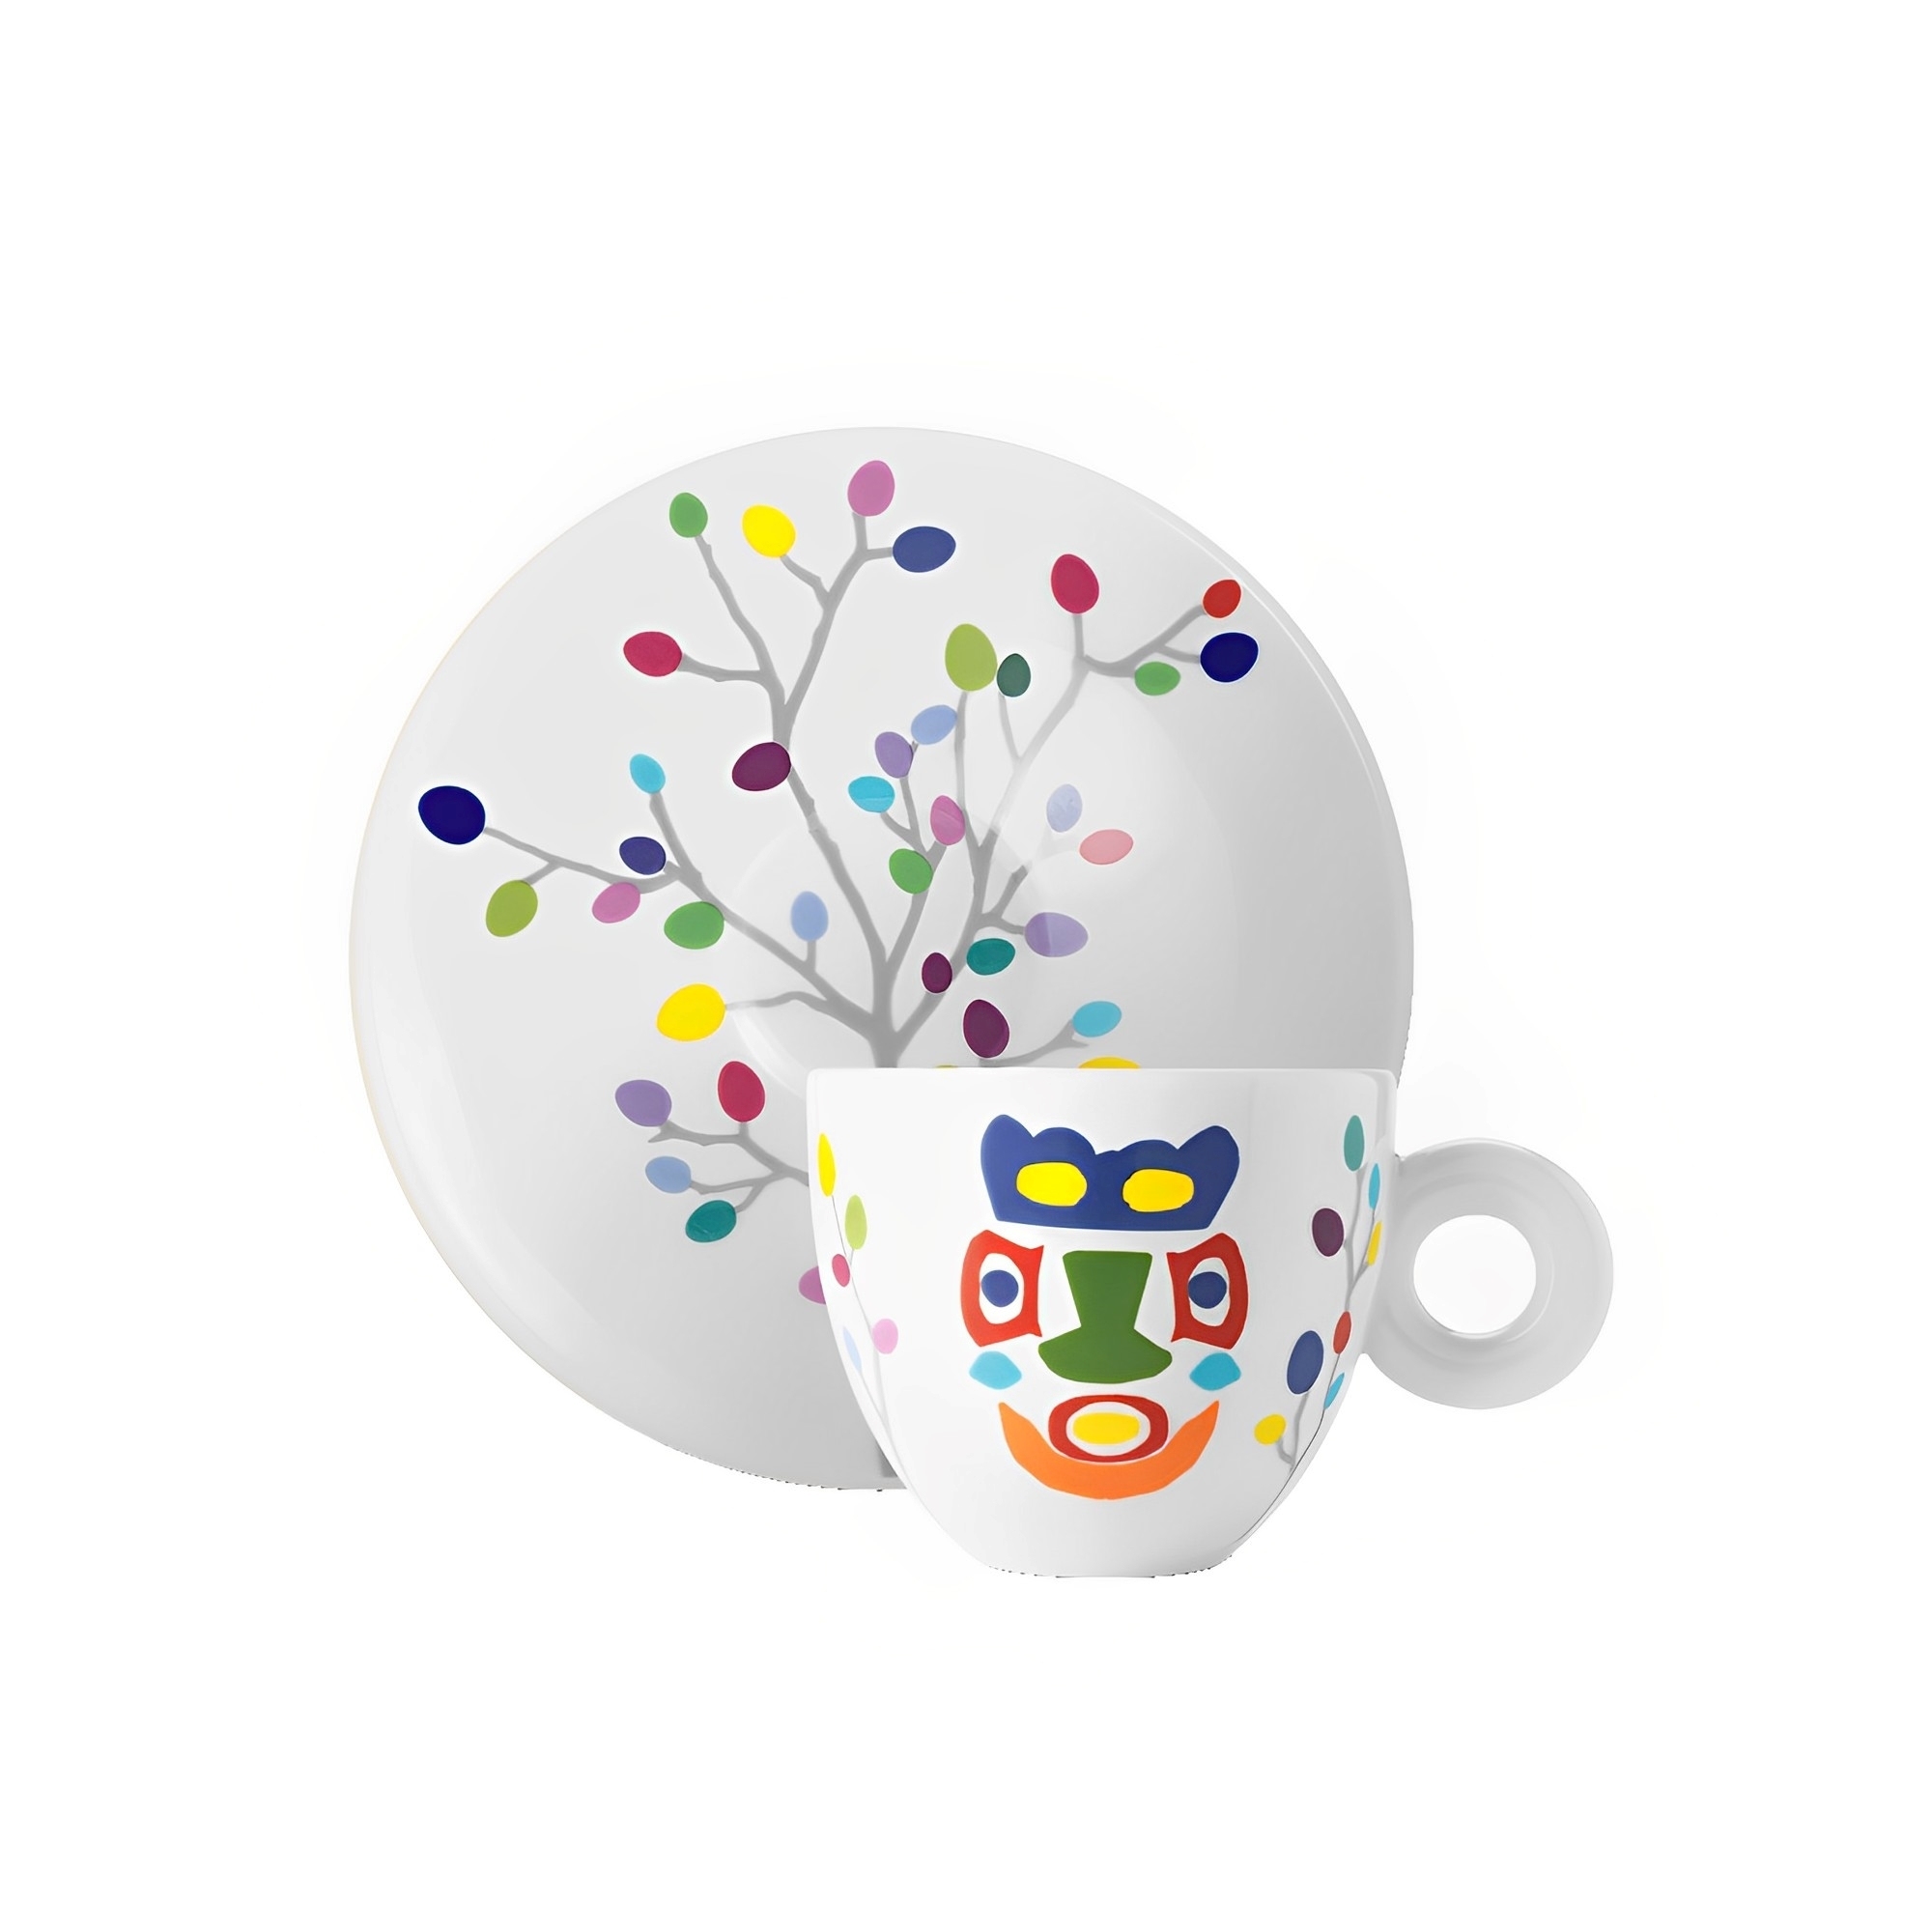 Illy Illy Art Collection Pascale Marthine Tayou 6 espresso cups